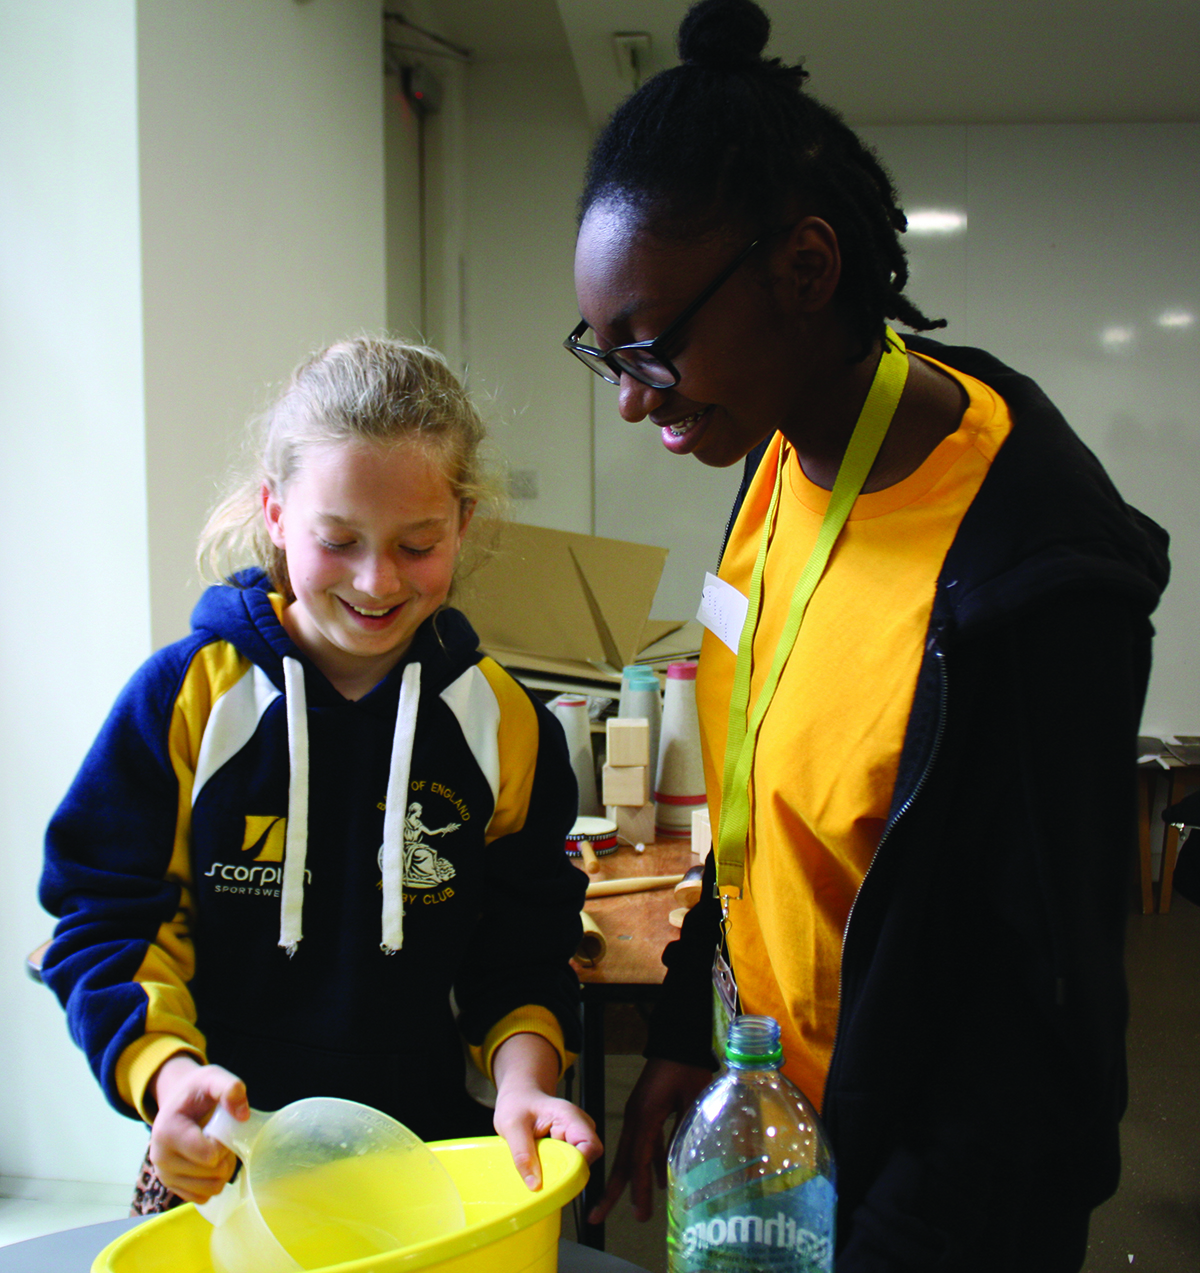 Two girls, one with white skin, one with black skin, are looking together at a bowl and jug. One girl is wearing a blue hoody with yellow and white flashes, the other is wearing a yellow t-shirt with a plain blue hoody.